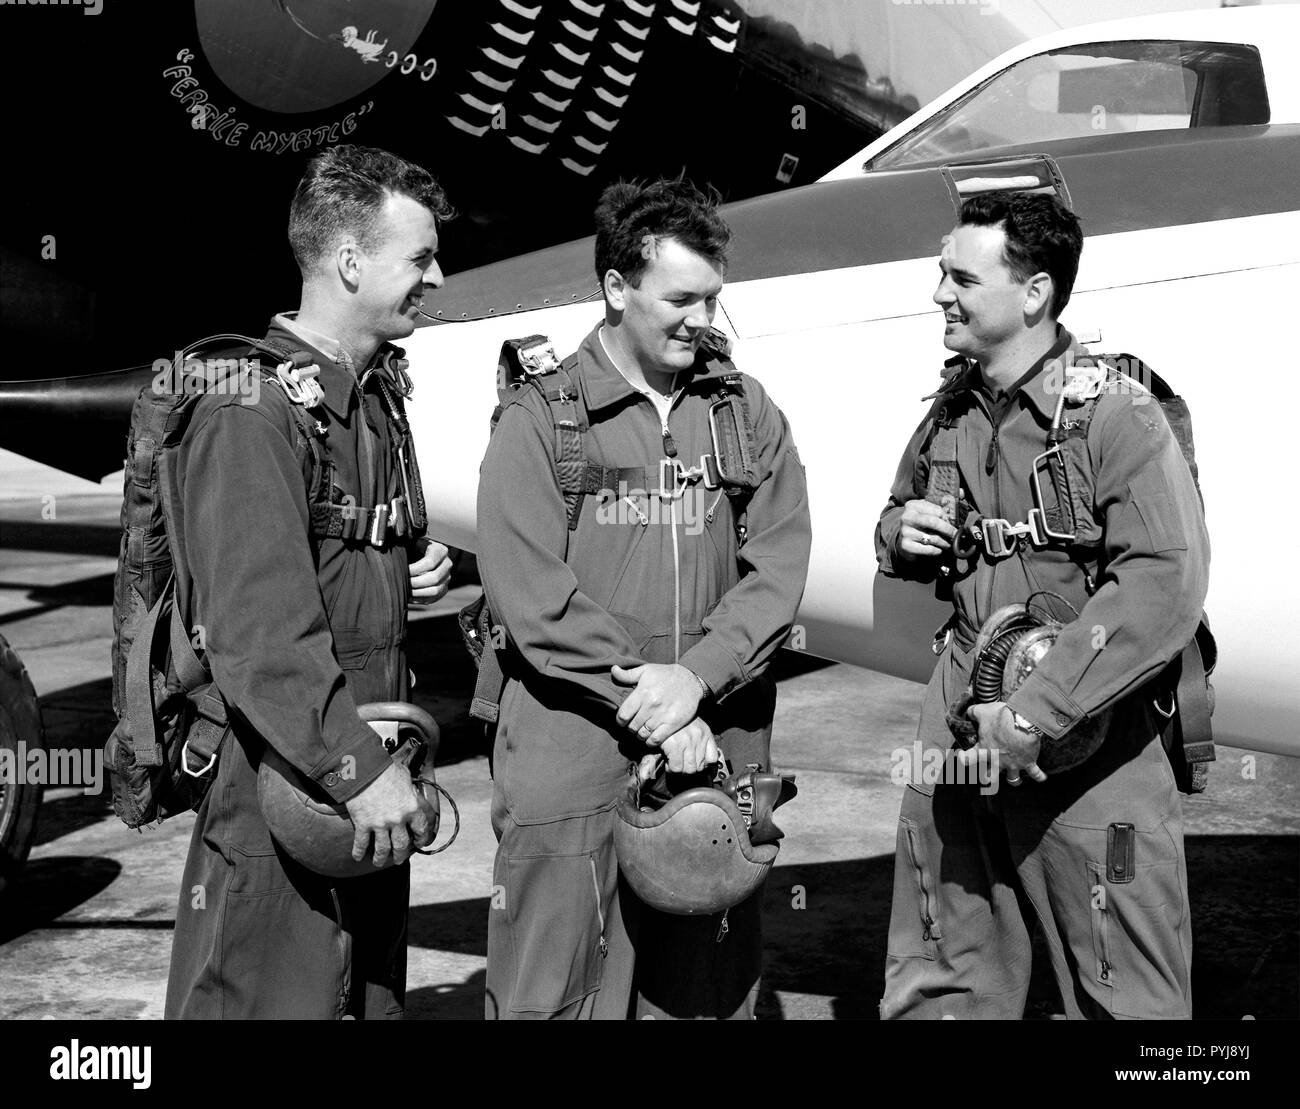 This photo shows test pilots, (Left-Right) Joseph A. Walker, Stanley P. Butchart and Walter P. Jones, standing in front of the Douglas D-558-II Skystreak, in 1952. These three test pilots at the National Advisory Committee for Aeronautics’ High-Speed Flight Research Station probably were discussing their flights in the aircraft. Stock Photo